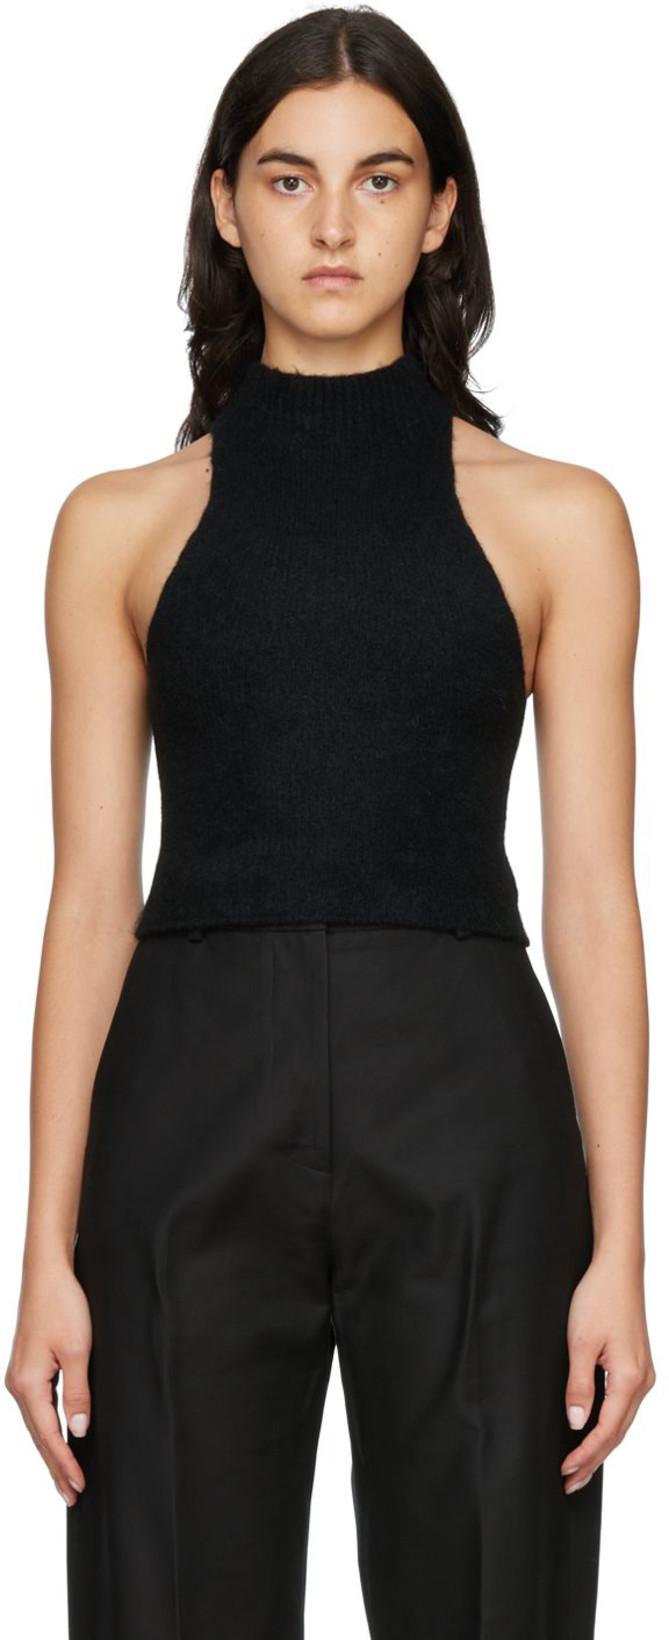 Black Sleeveless Turtleneck by ARCH THE